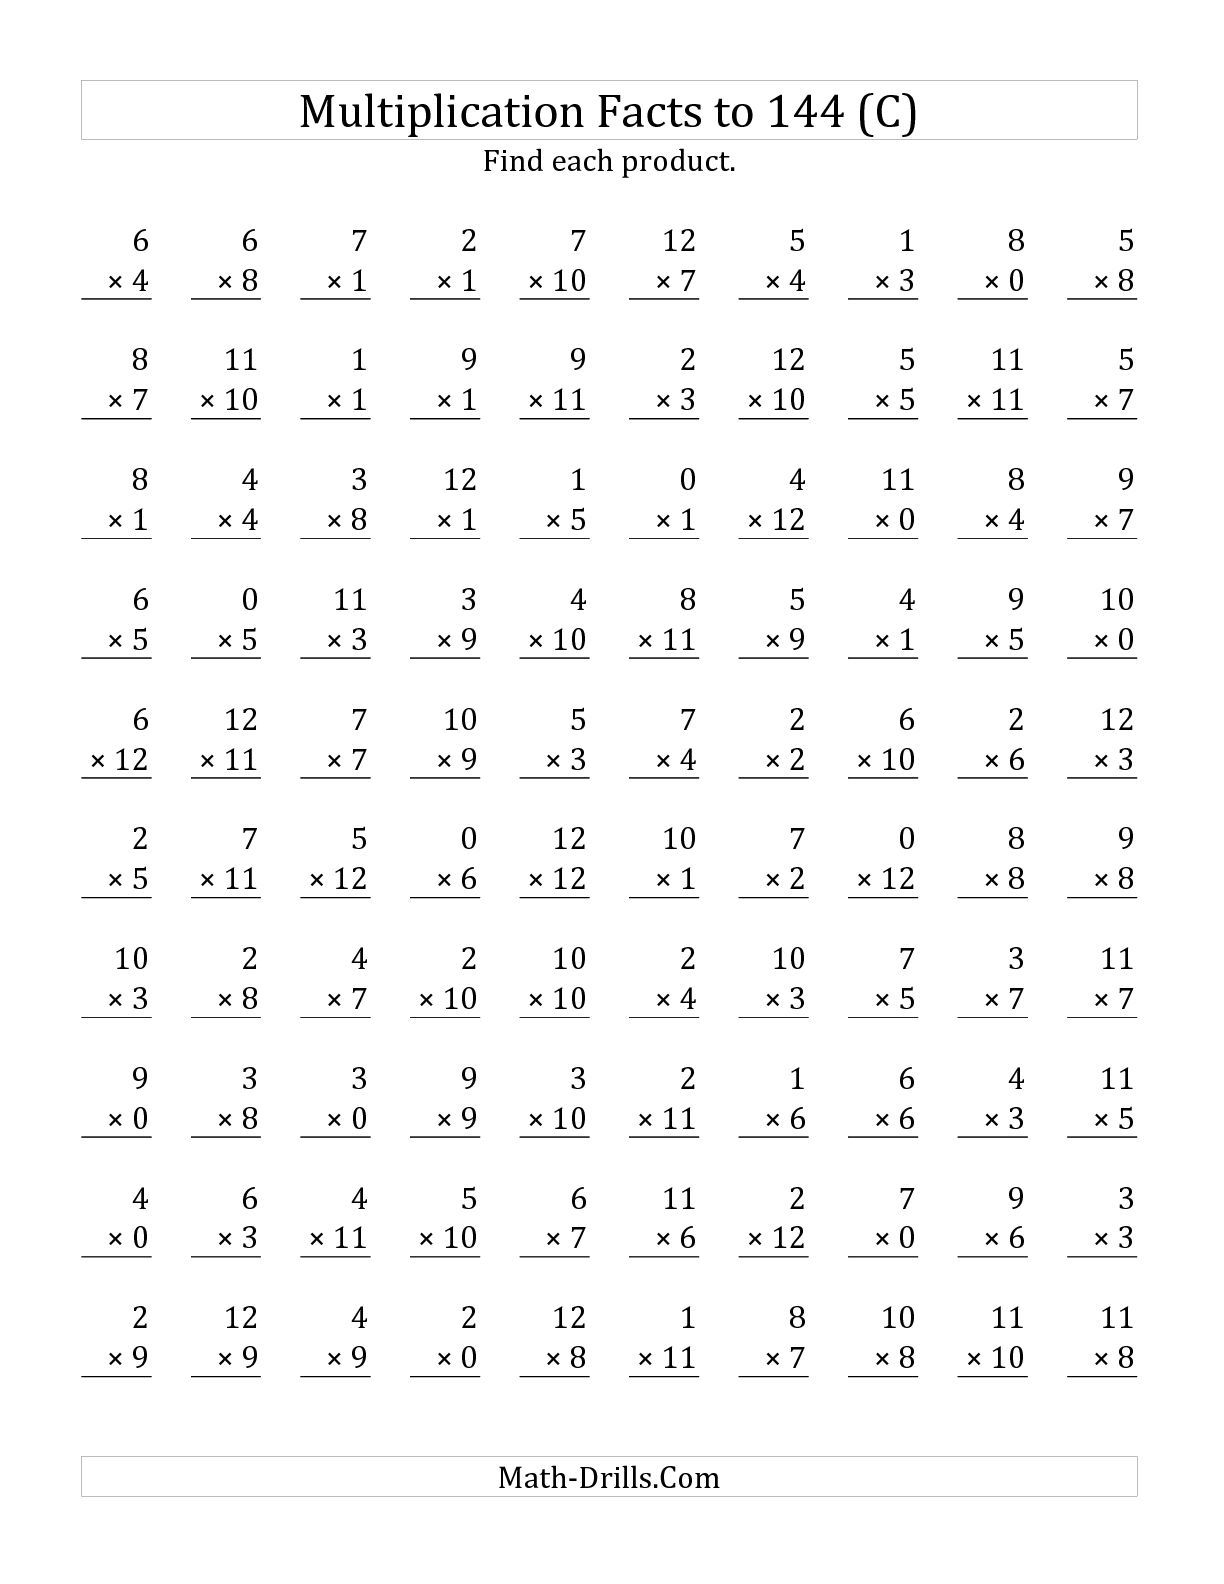 The Multiplication Facts To 144 Including Zeros (C) Math for Multiplication Worksheets 7 Facts